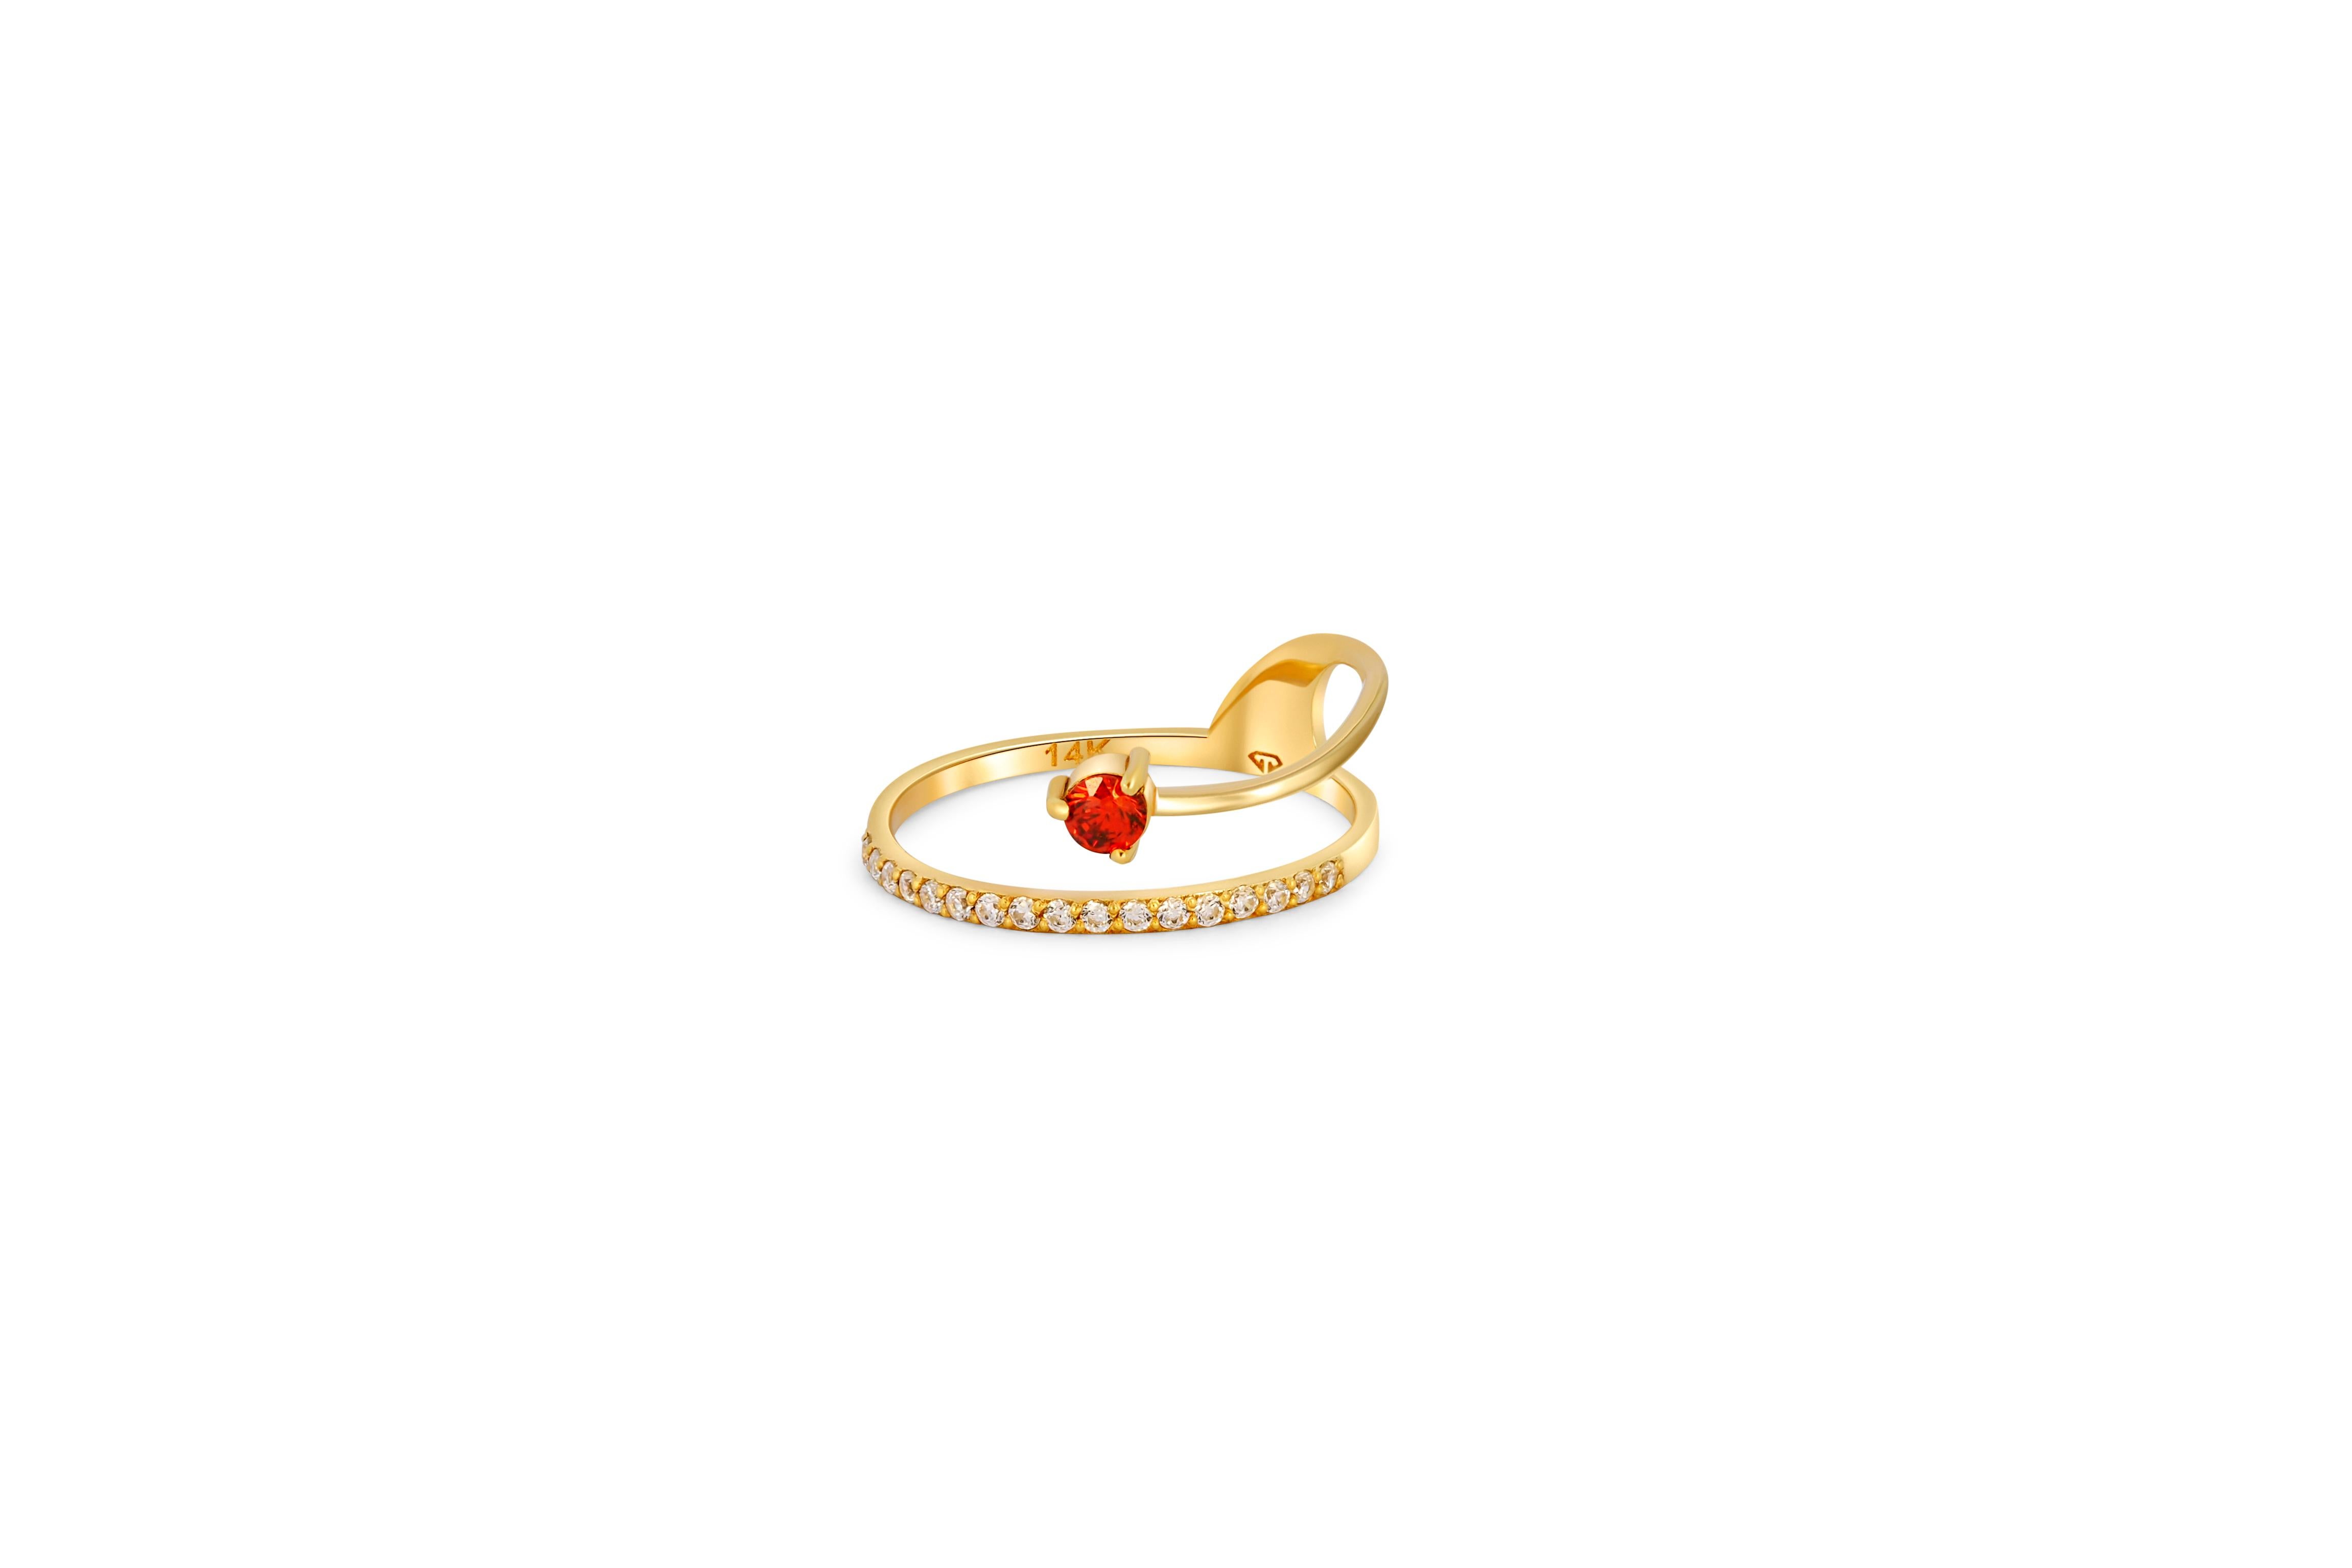 For Sale:  14Kt Gold Swirl Engagement Ring. 11